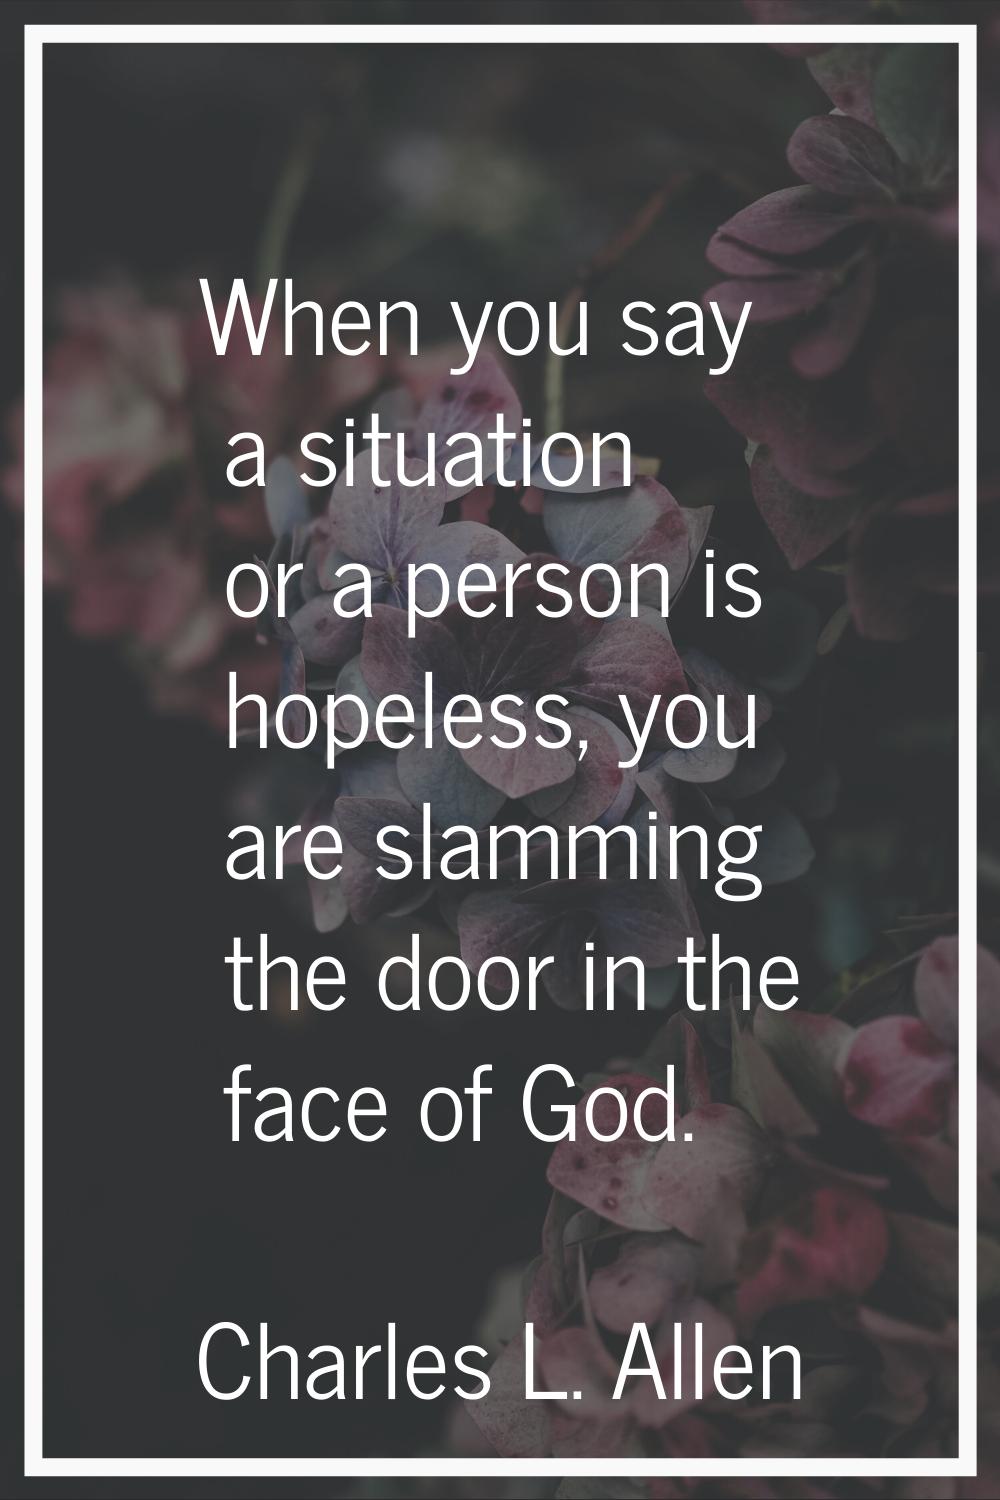 When you say a situation or a person is hopeless, you are slamming the door in the face of God.